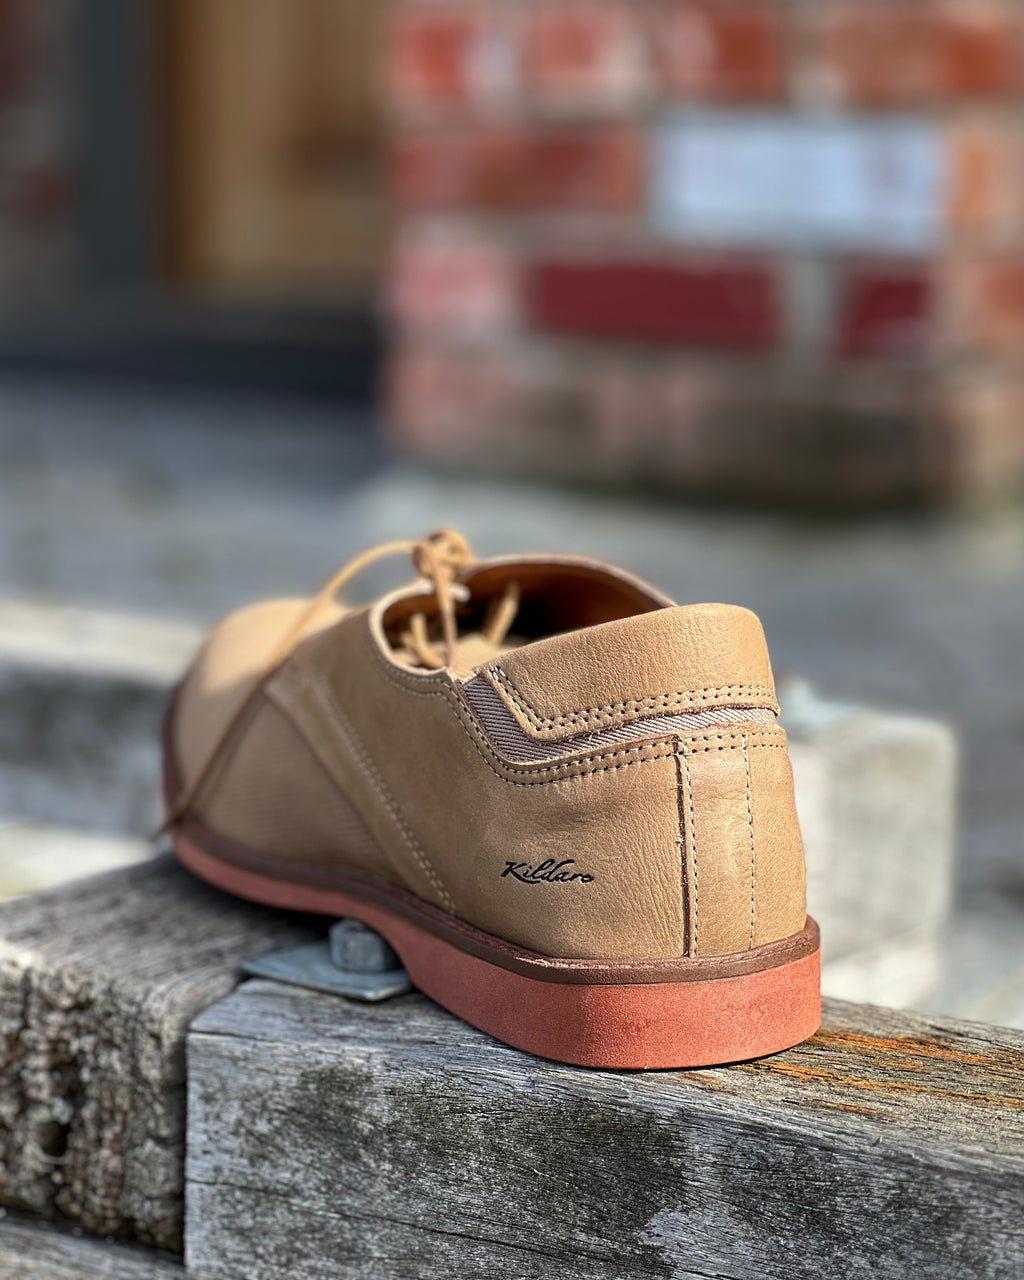 Genuine leather shoe for men by Kildare